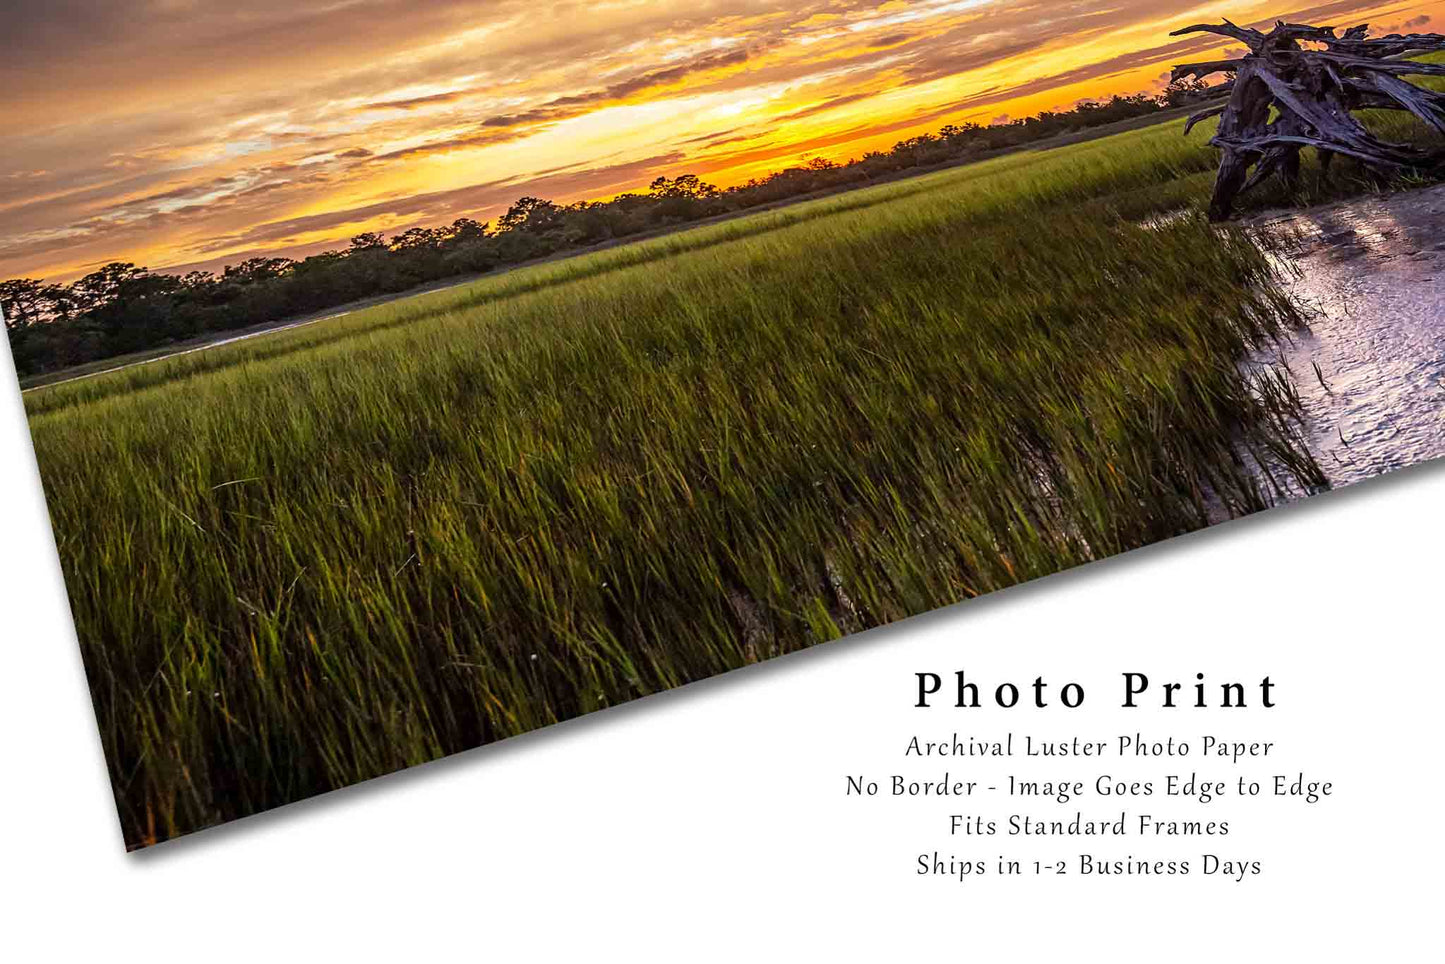 Lowcountry Photography Print - Wall Art Picture of Dead Tree in Salt Marsh at Sunset in Pinckney Island South Carolina Landscape Decor